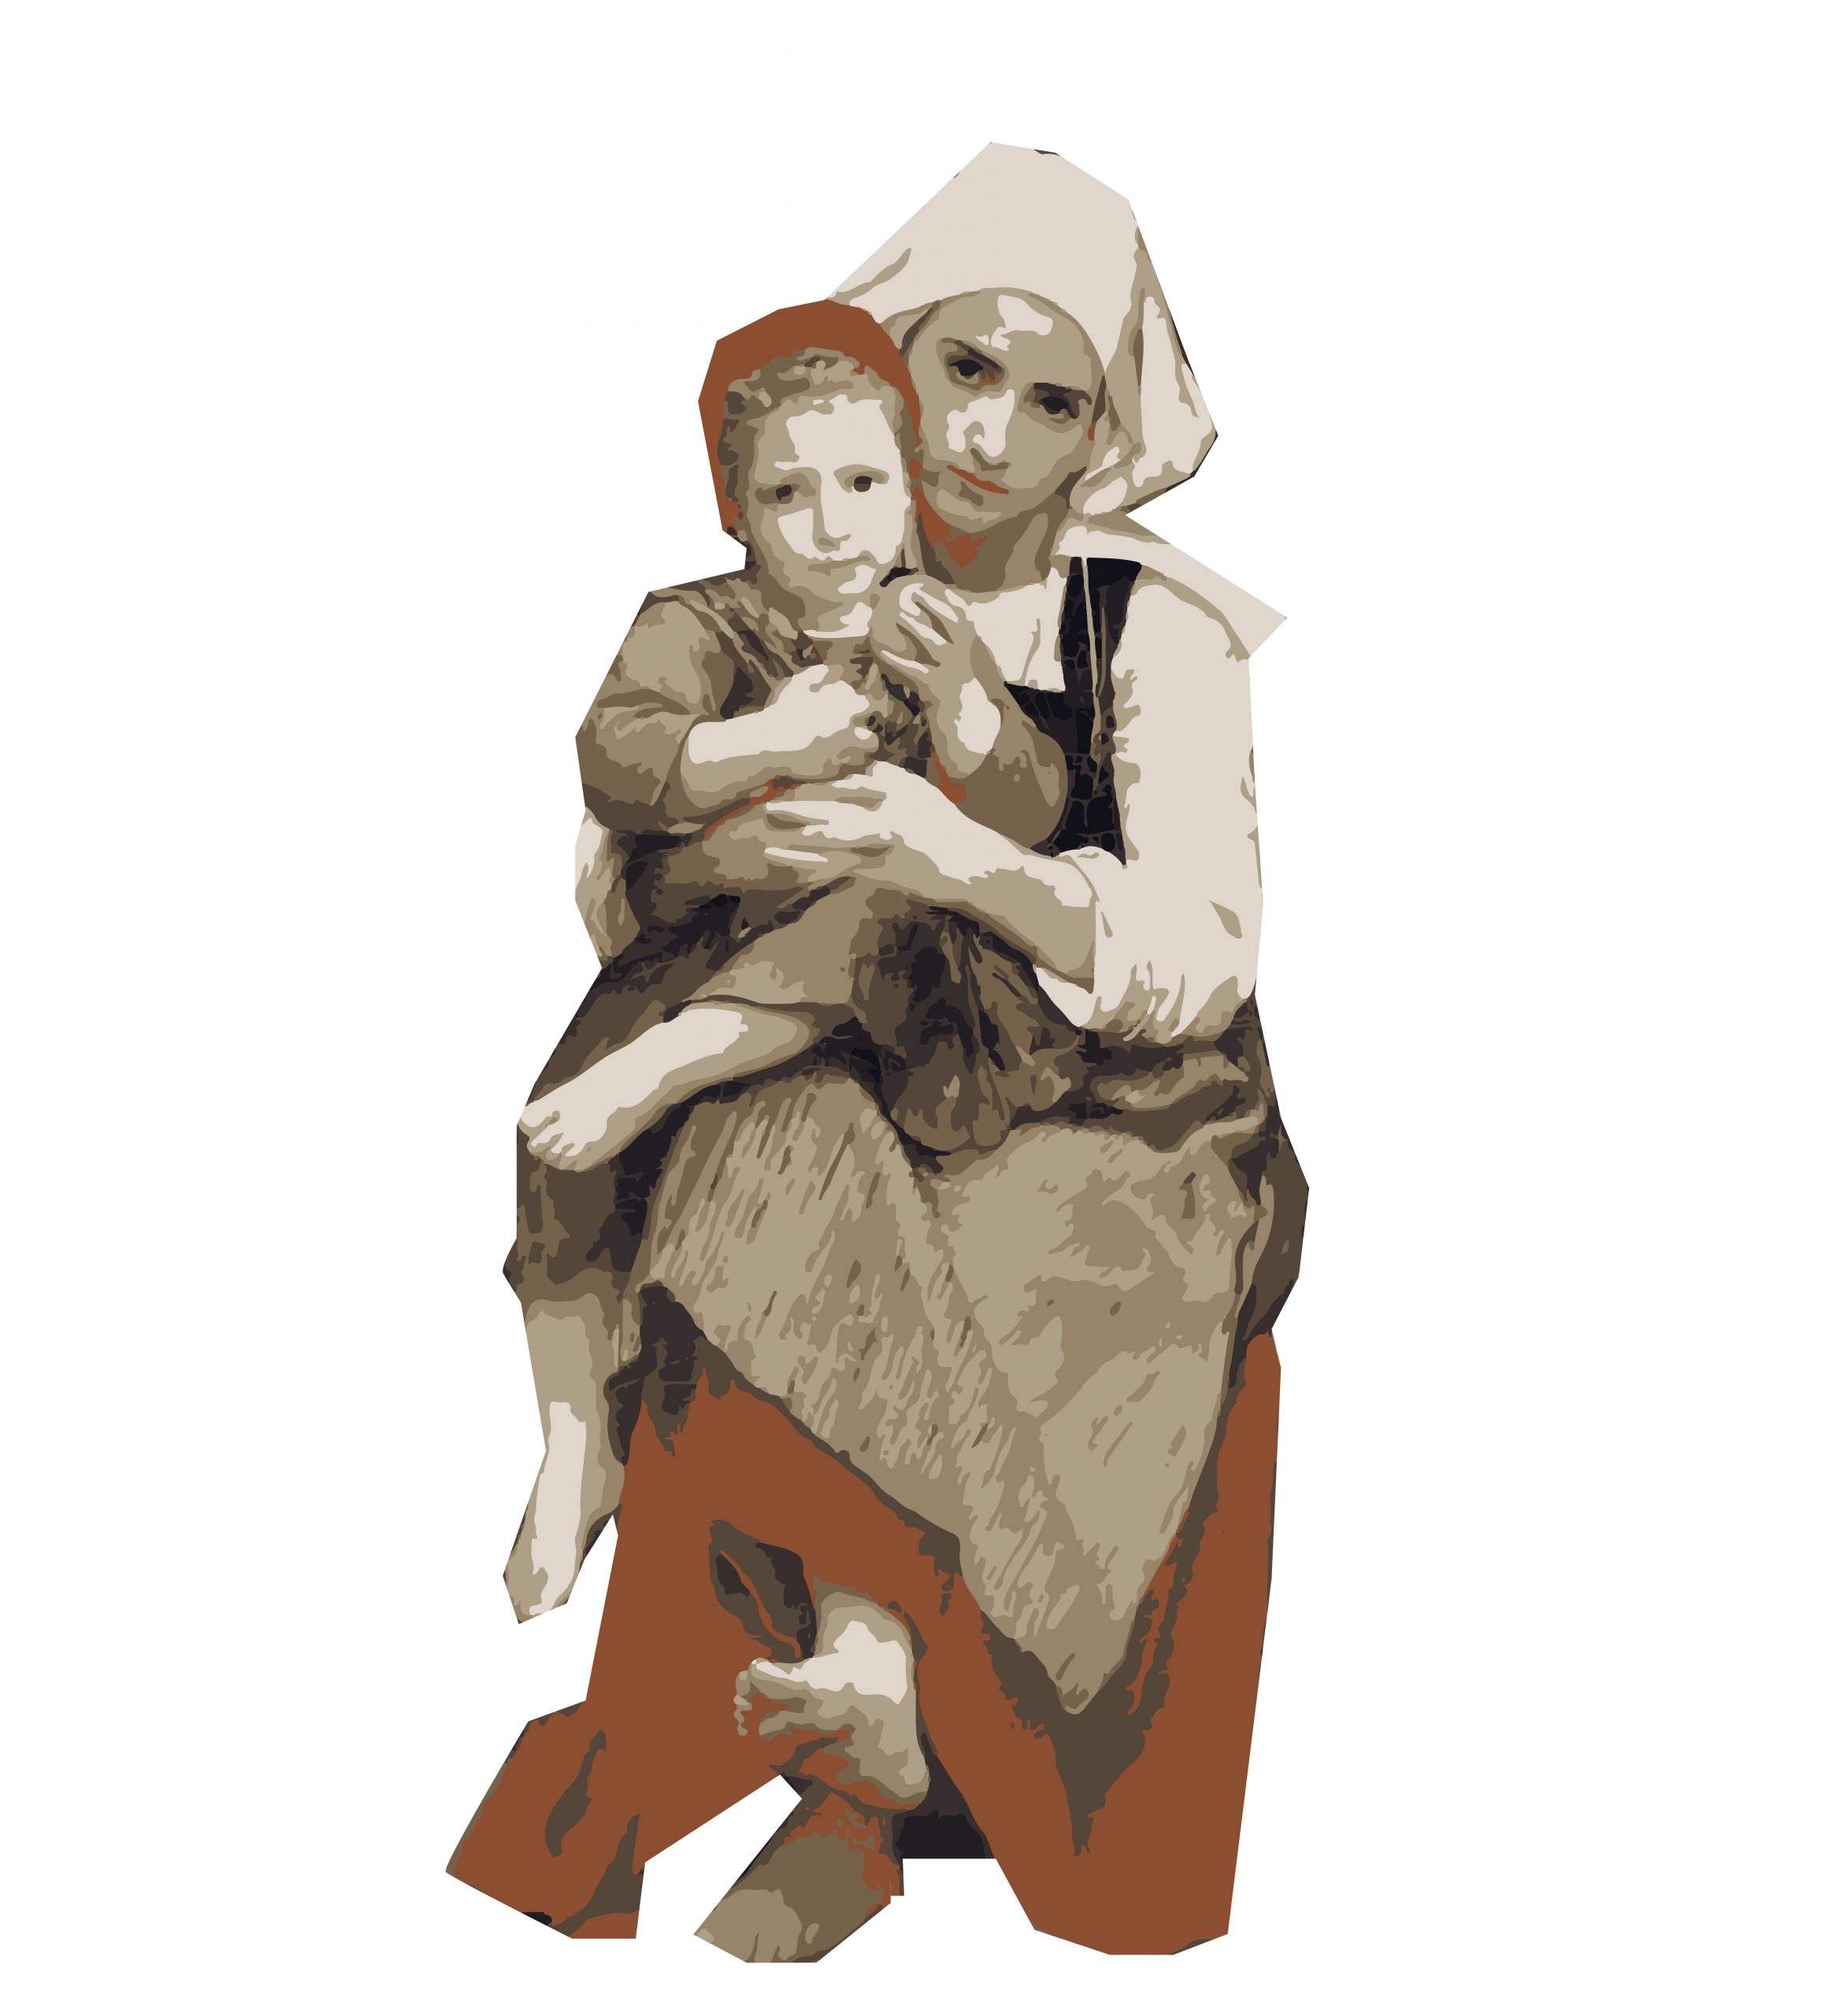 A mother and child